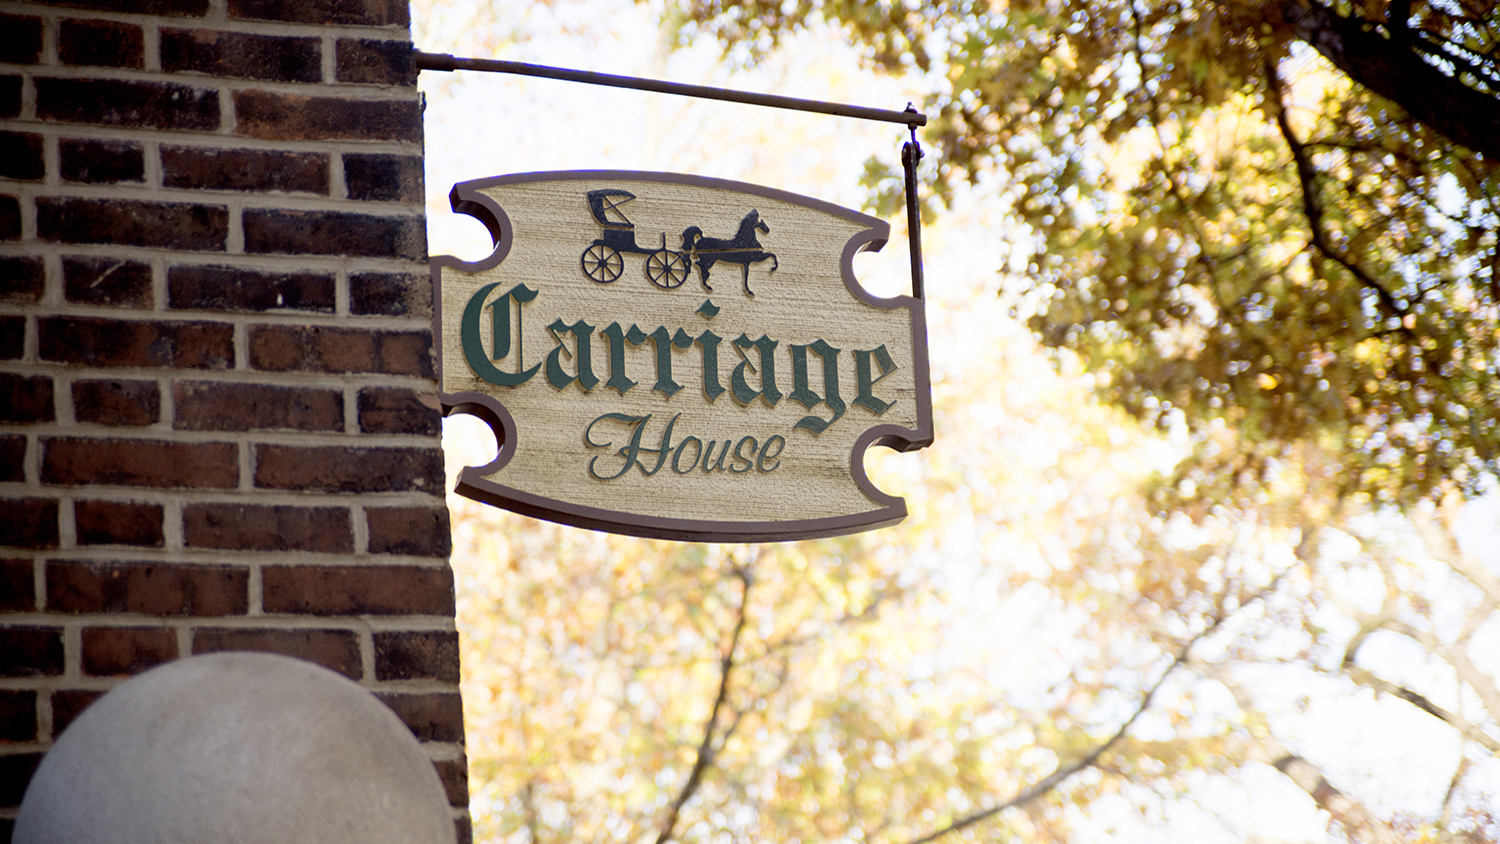 The Carriage House Facility